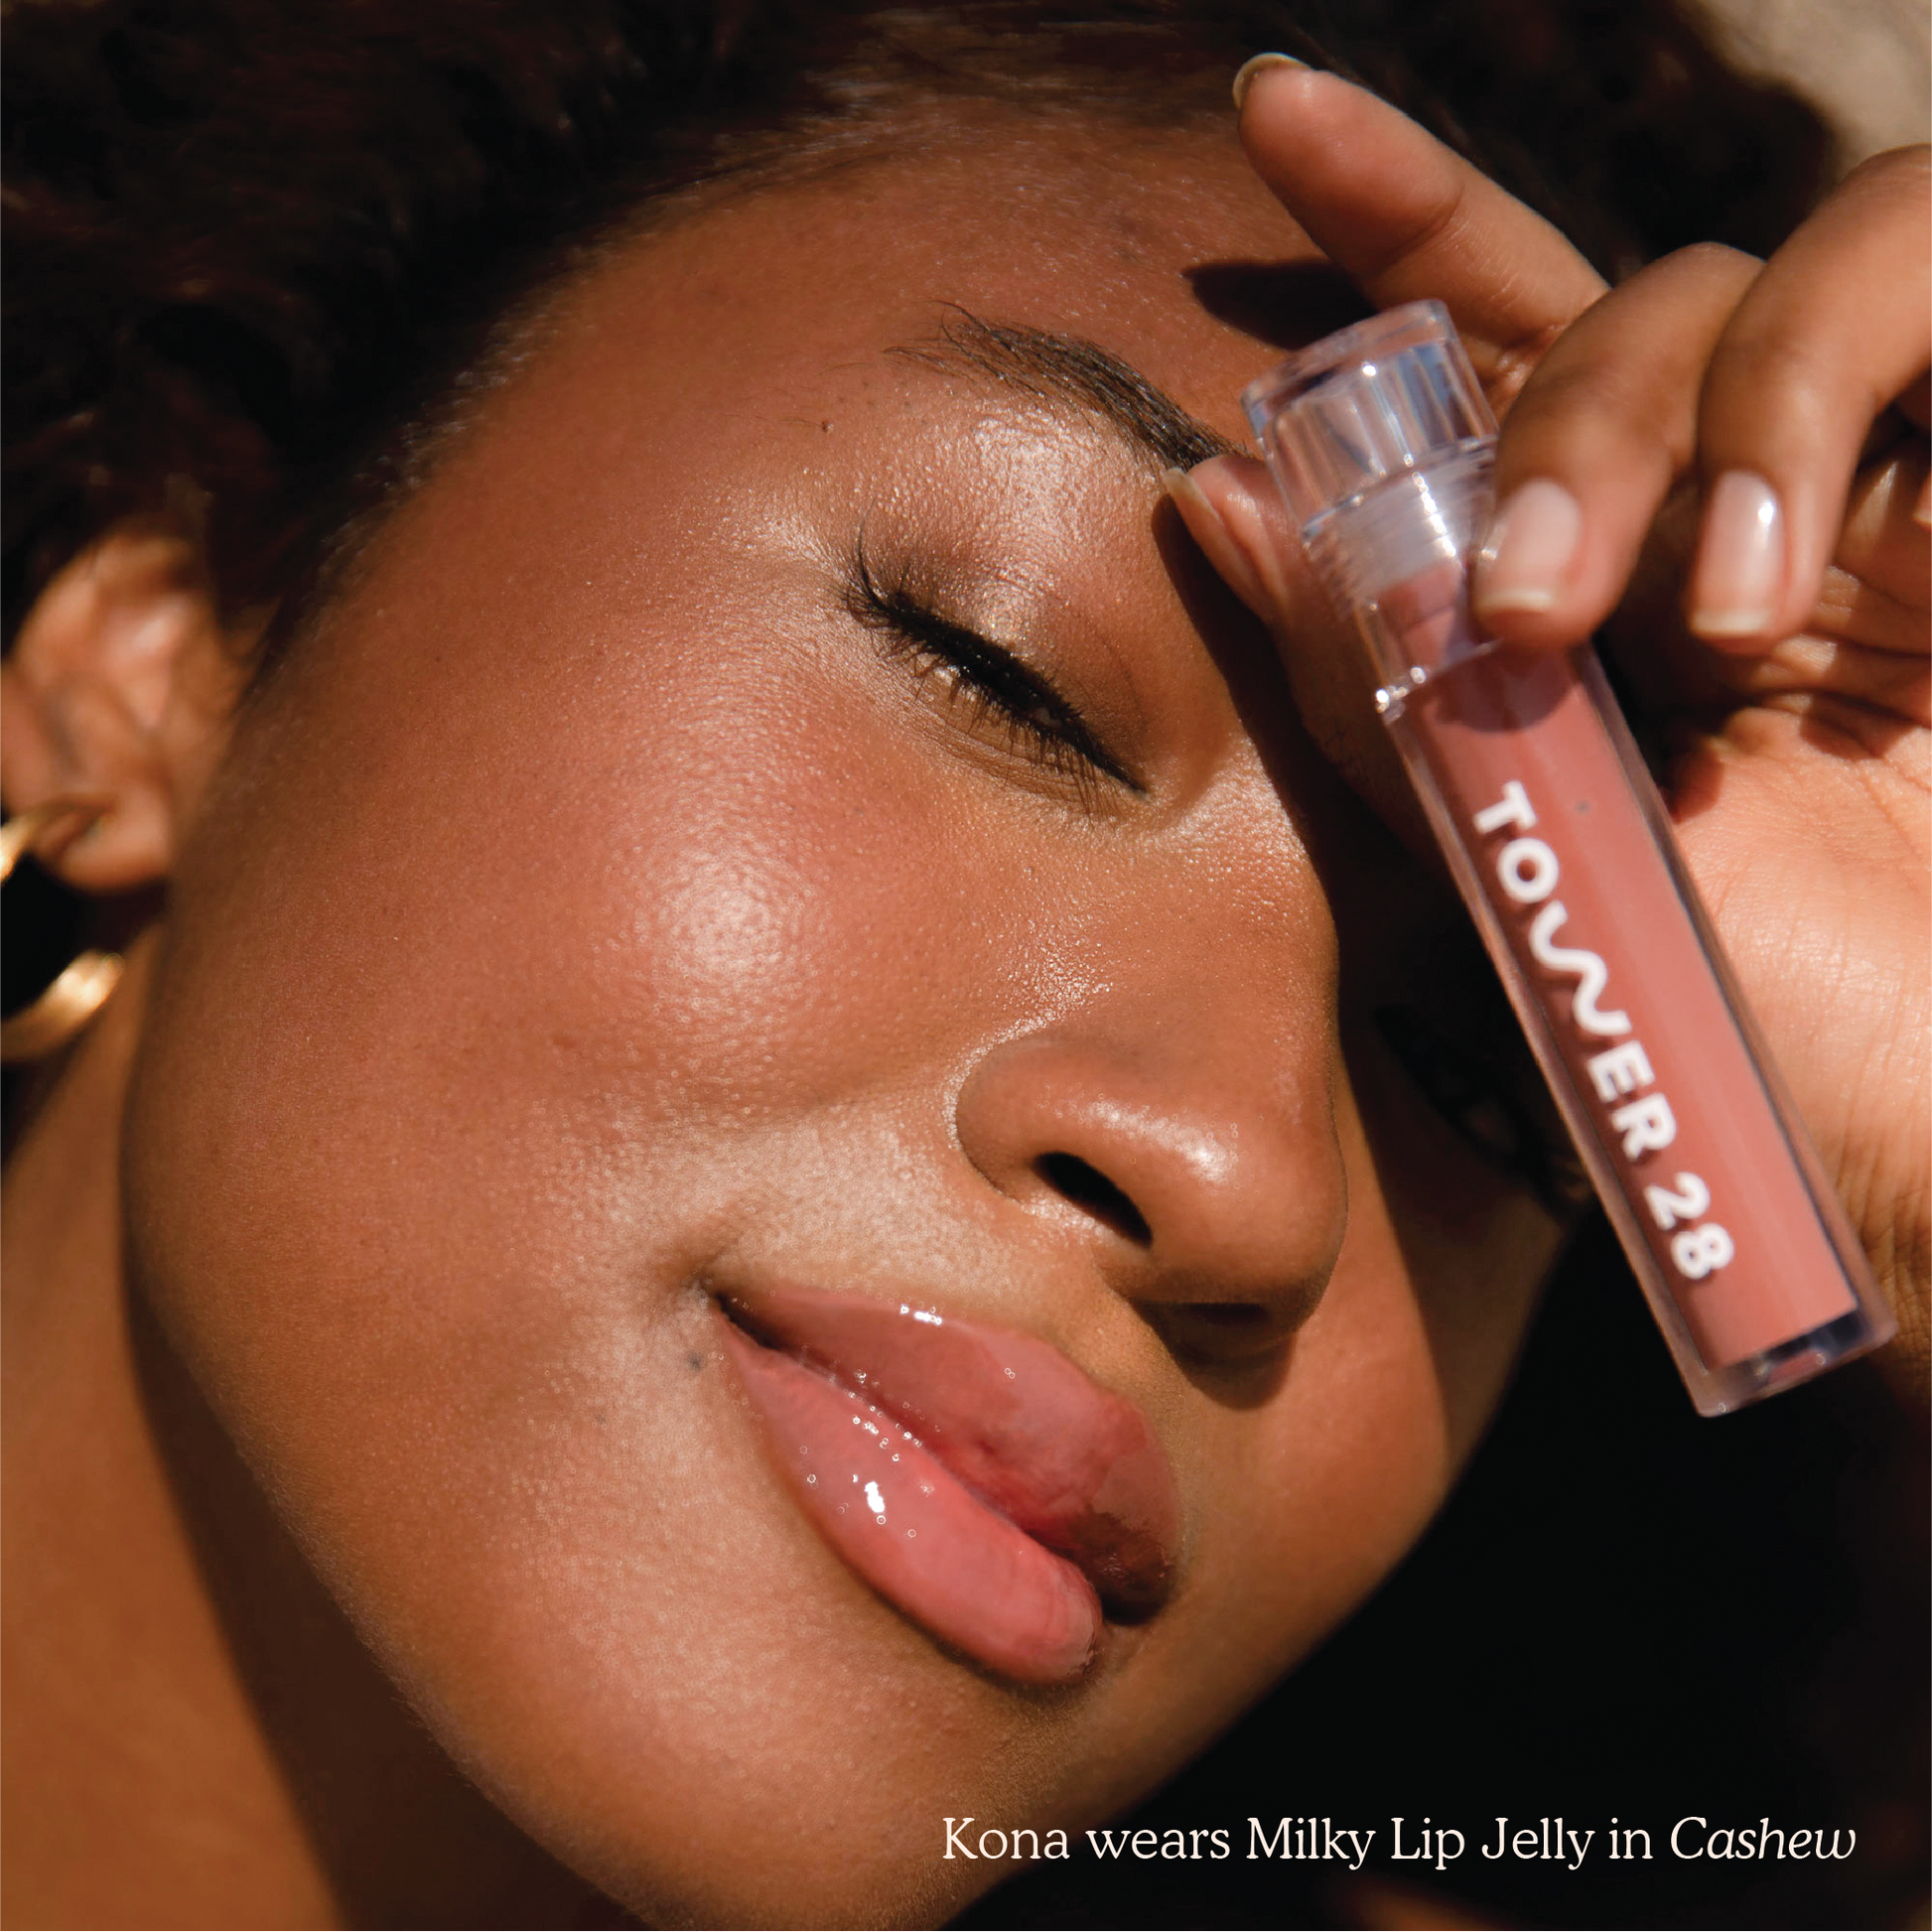 [Shared: Closeup photo of a girl smiling with very glossy lips, wearing the Tower 28 Beauty ShineOn Milky Lip Jelly shade in Cashew (a milky rosy-brown), and holding an acrylic slim lip gloss tube with "Tower 28" logo over her eye